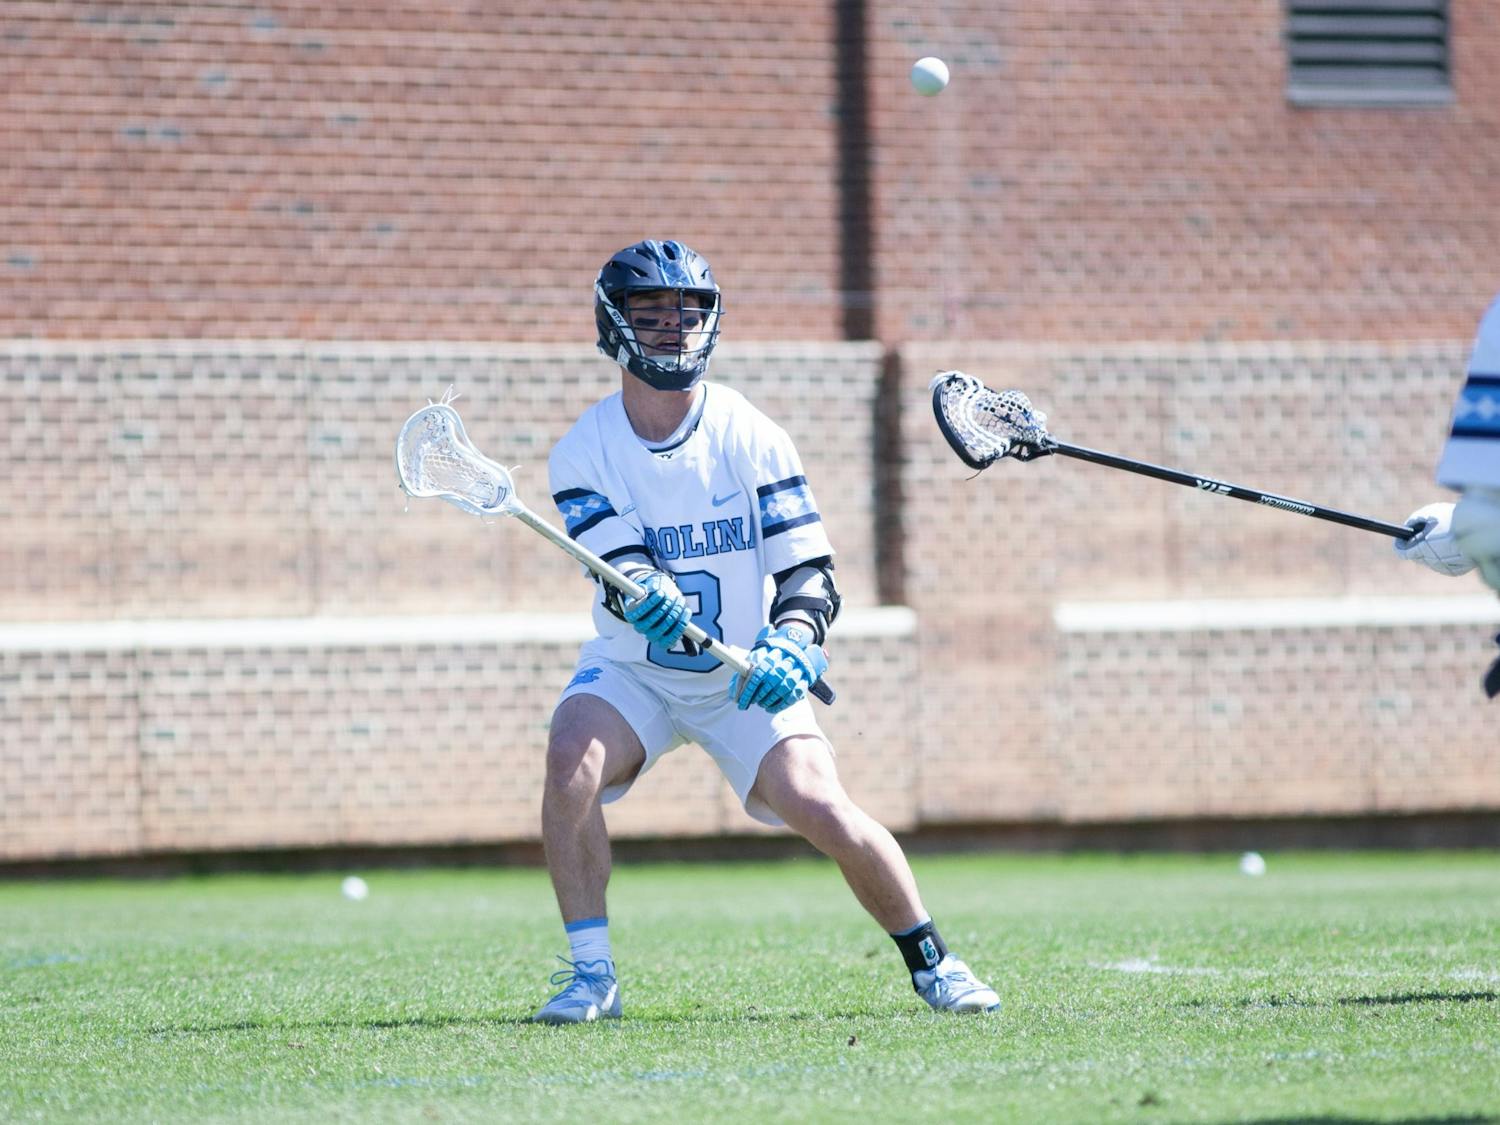 UNC senior attackman Nicky Solomon (8) passes the ball during a home game against Duke at Dorrance Field on Saturday Apr. 2, 2022.